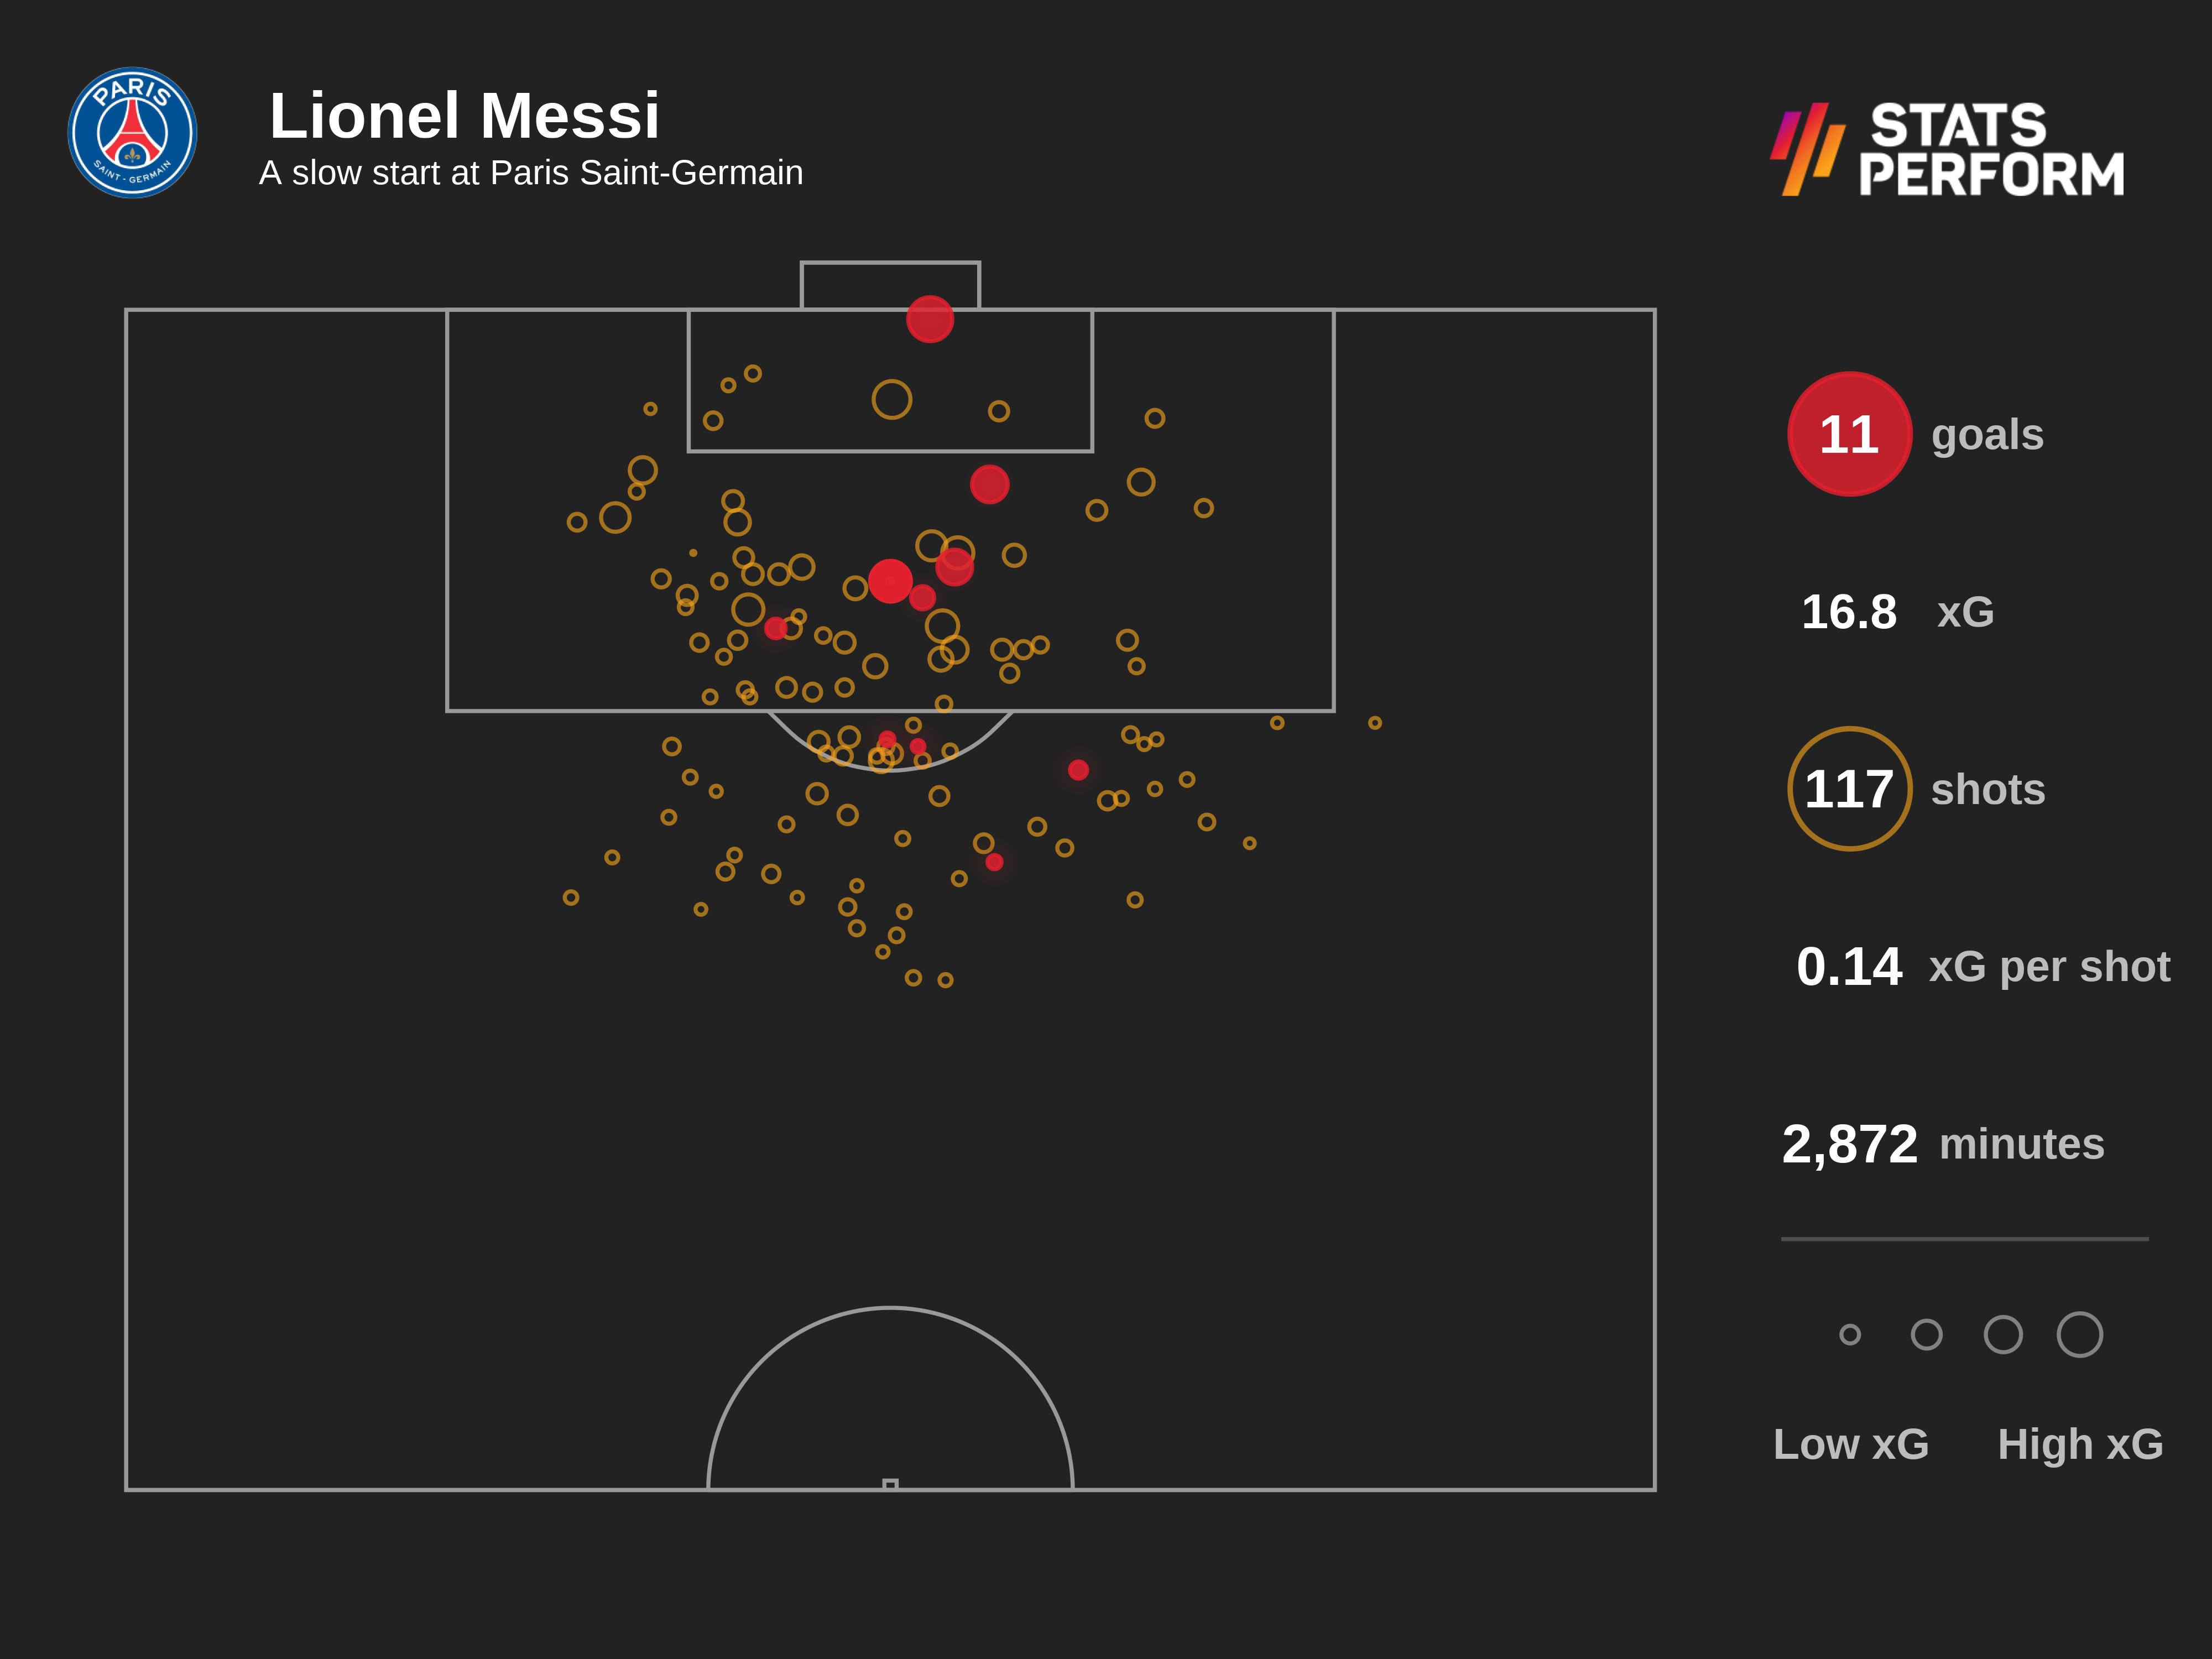 Lionel Messi did not hit his usual heights in the 2021-22 season